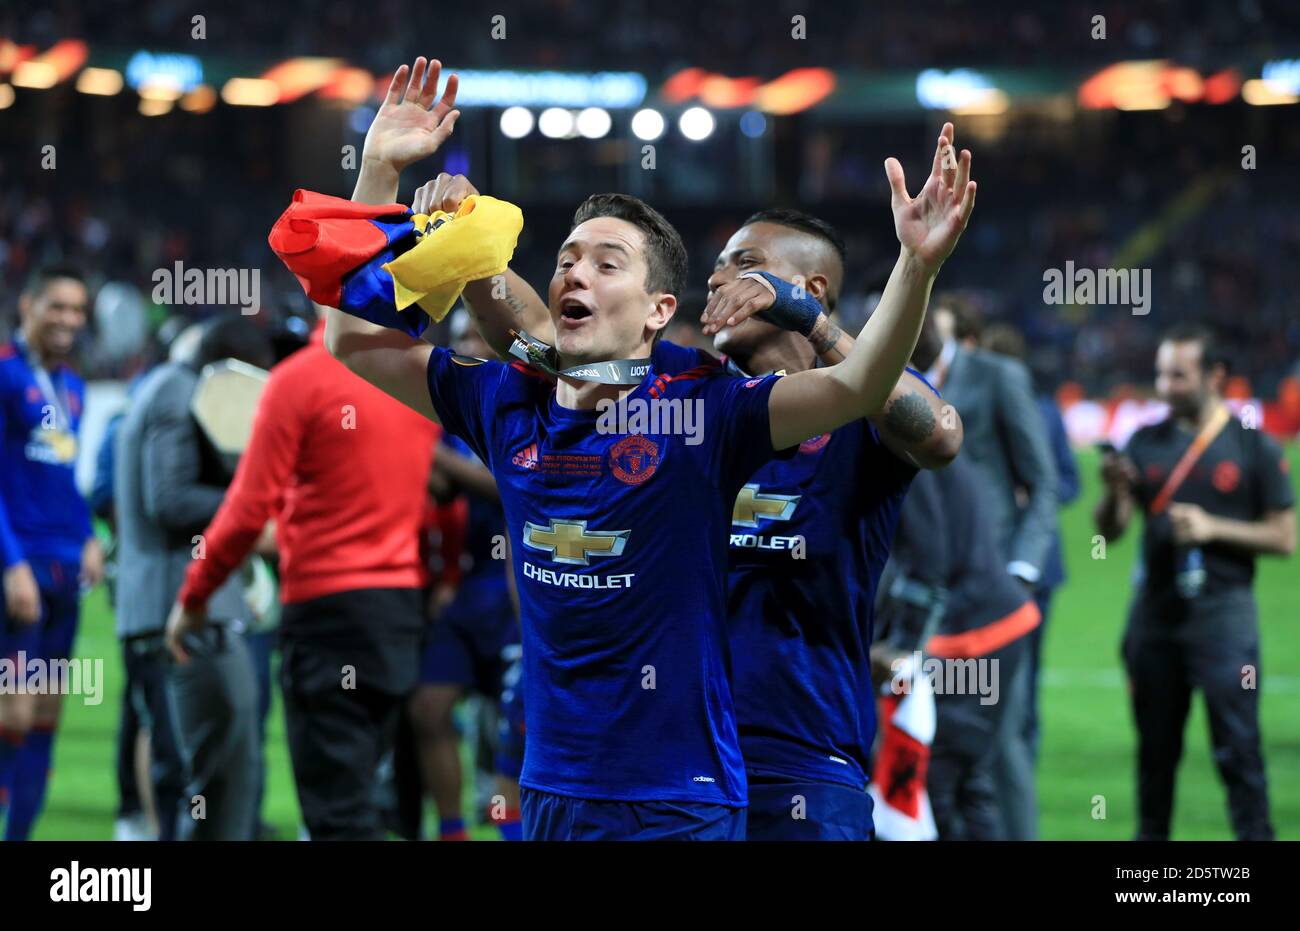 Manchester United's Ander Herrera and Manchester United's Luis Antonio Valencia celebrate after winning the UEFA Europa League Final in Stockholm Stock Photo